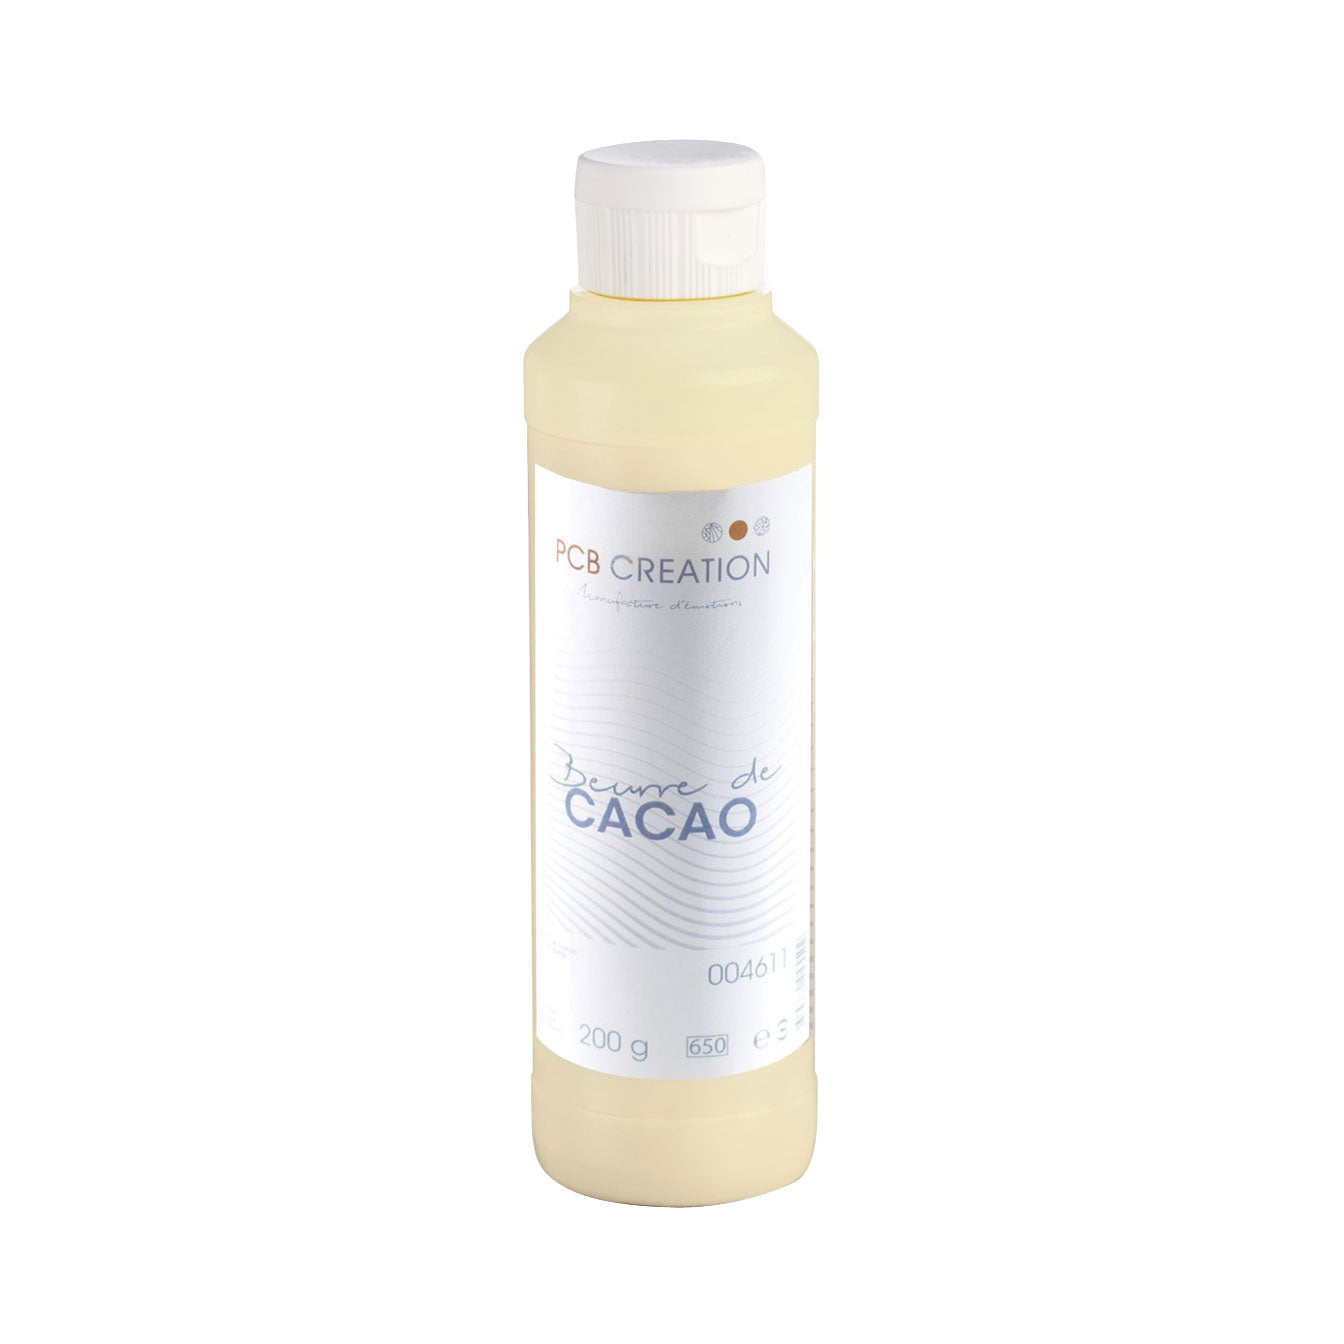 PCB CREATION White Coloured Cocoa Butter, 200g